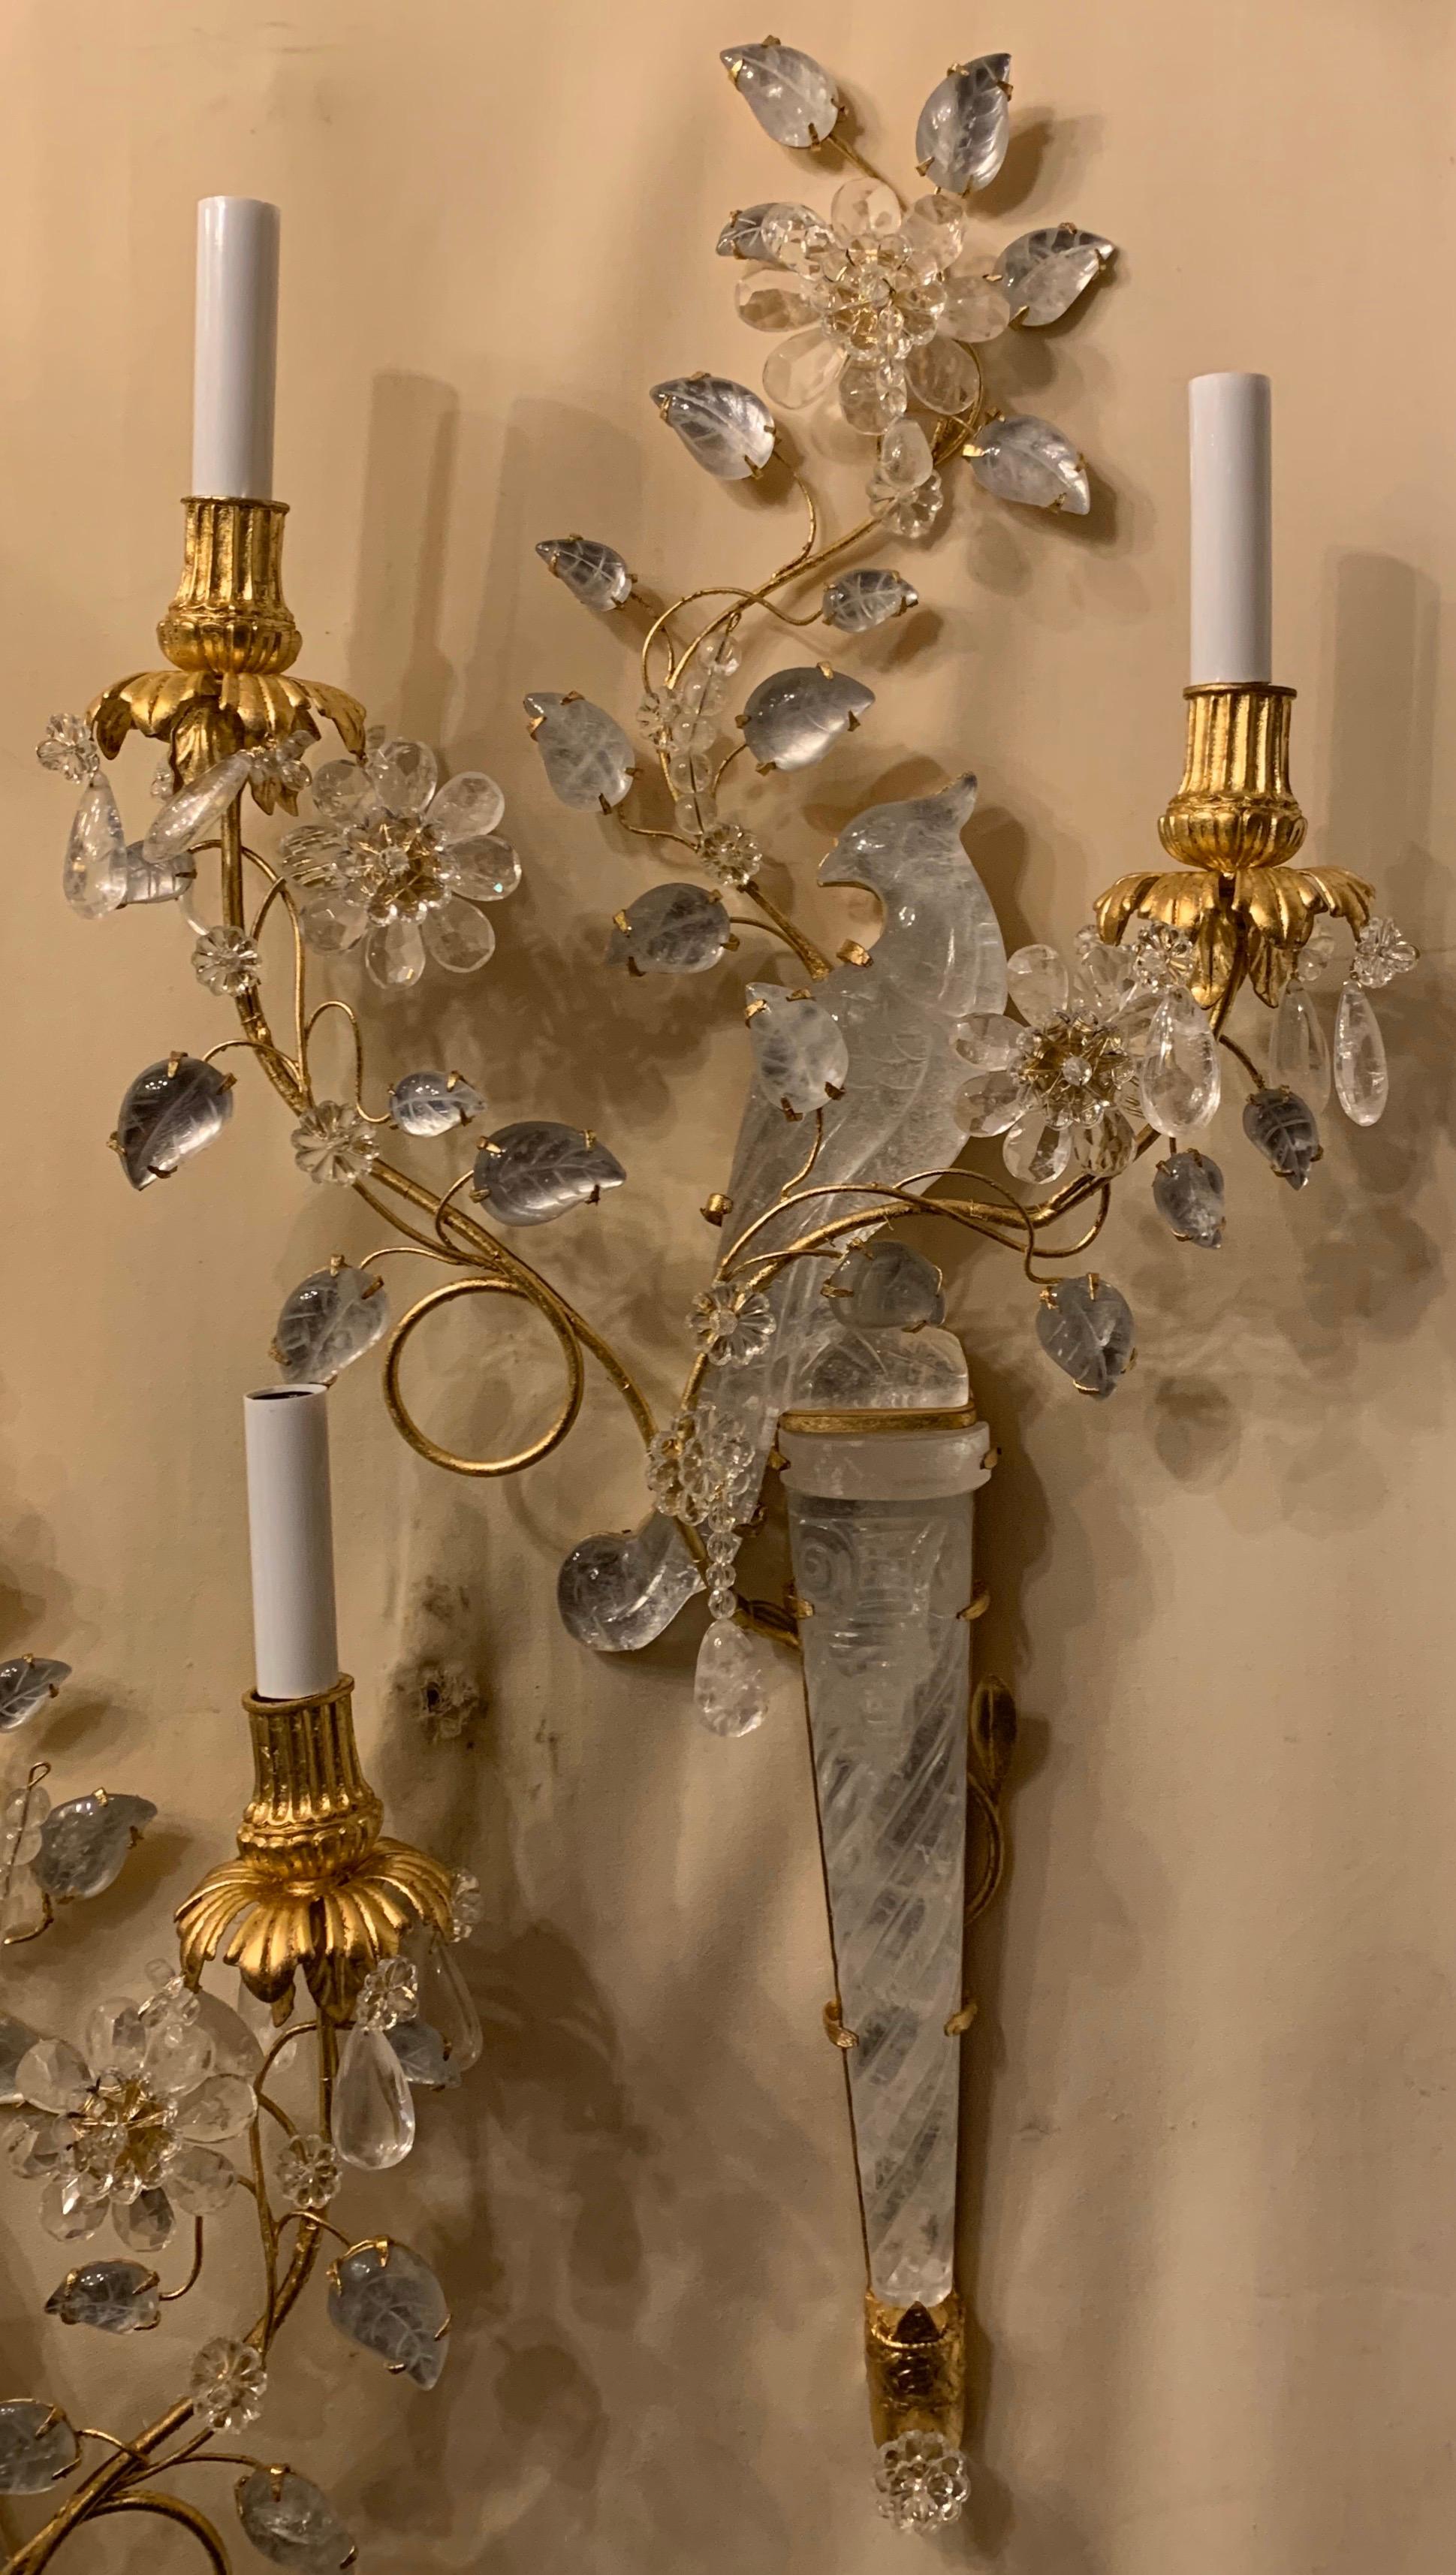 A wonderful pair of chinoiserie motif rock crystal two-arm with new candelabra sockets and wiring gilt bird form parrot sconces with flowers.

3 Pairs Available
Each pair sold separately